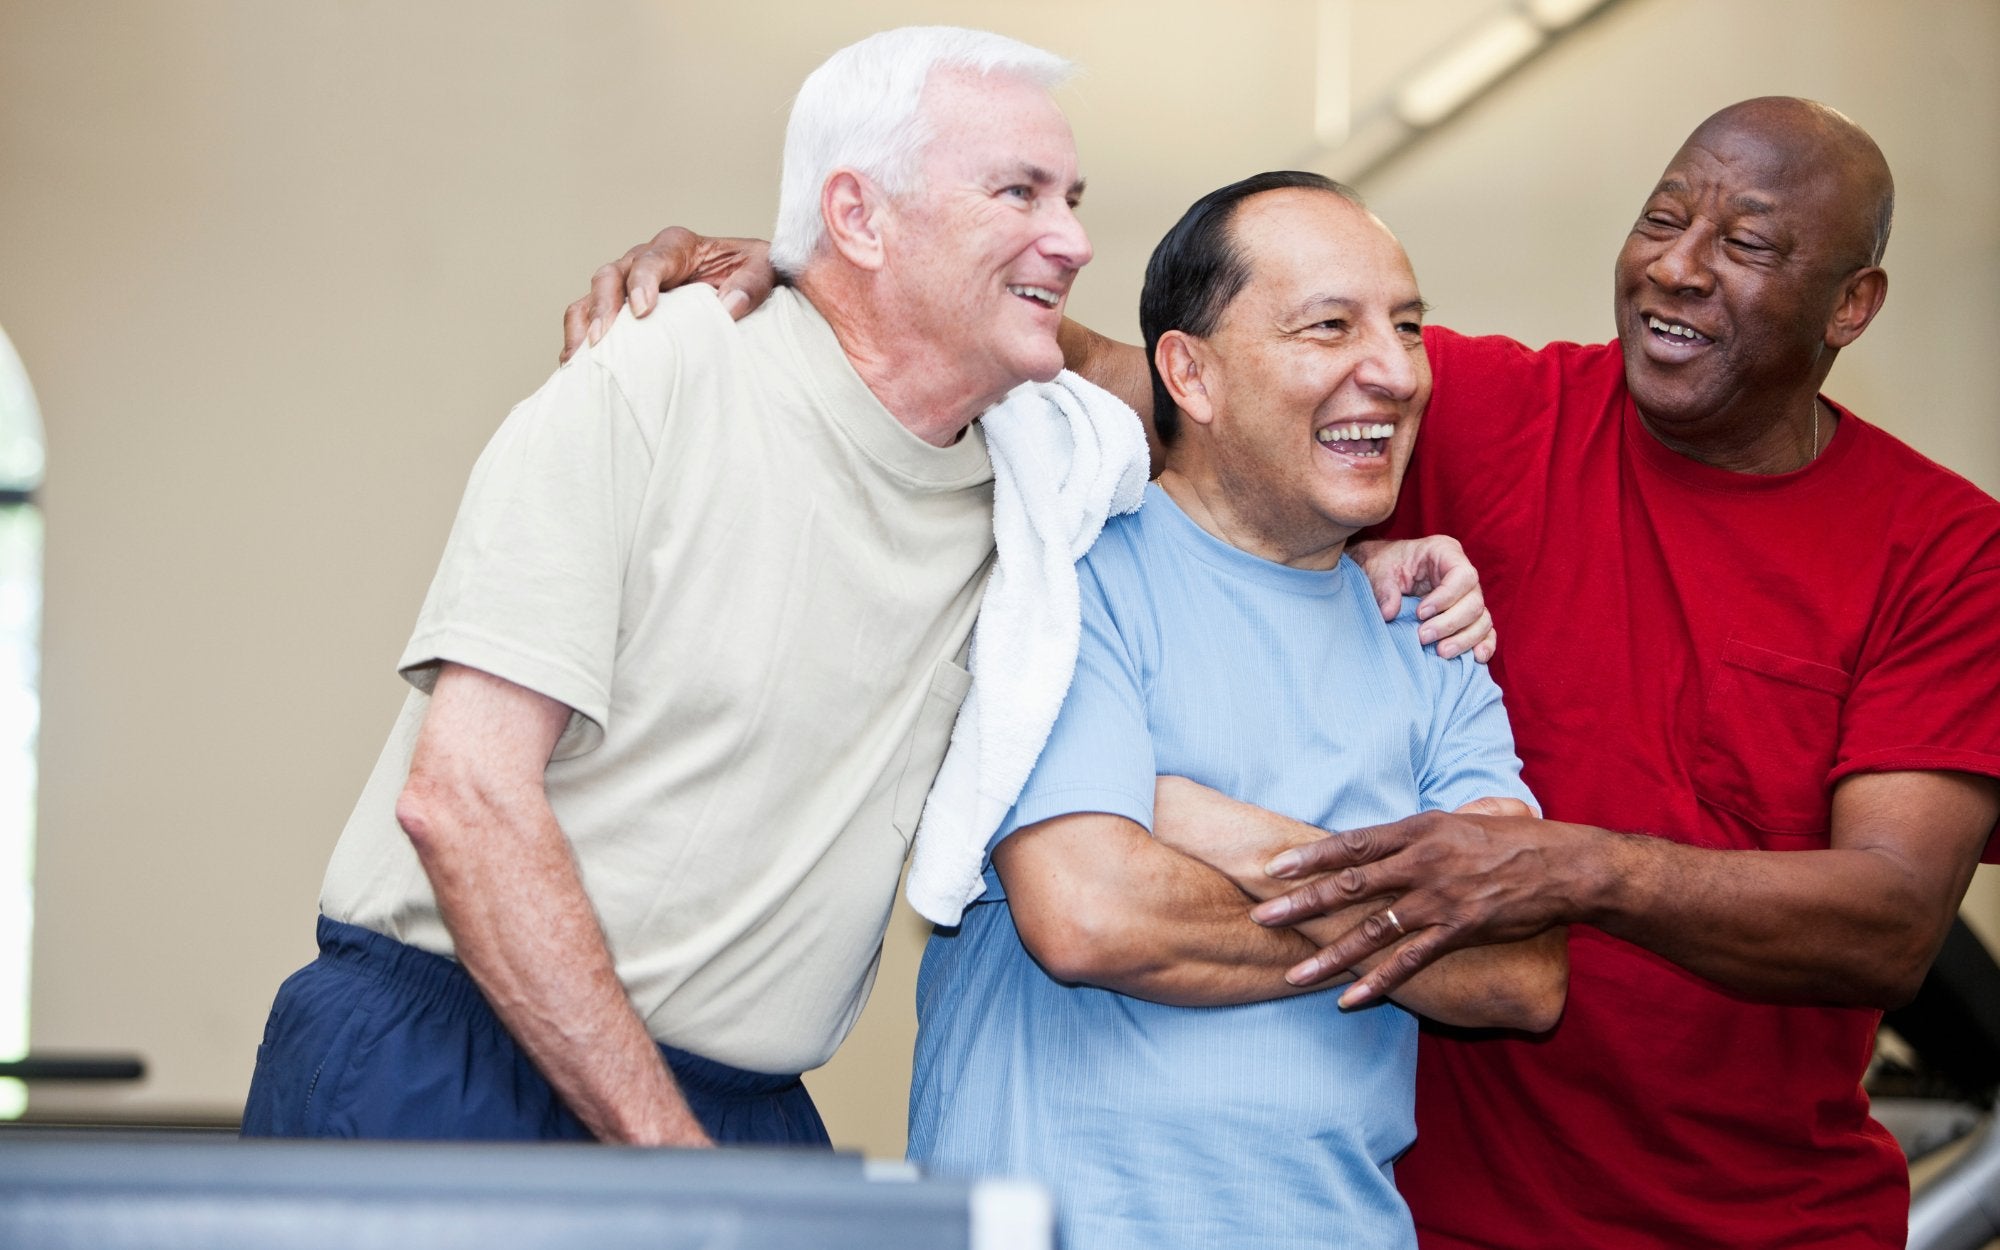 What is the best age to start taking care of your prostate? - Utiva USA